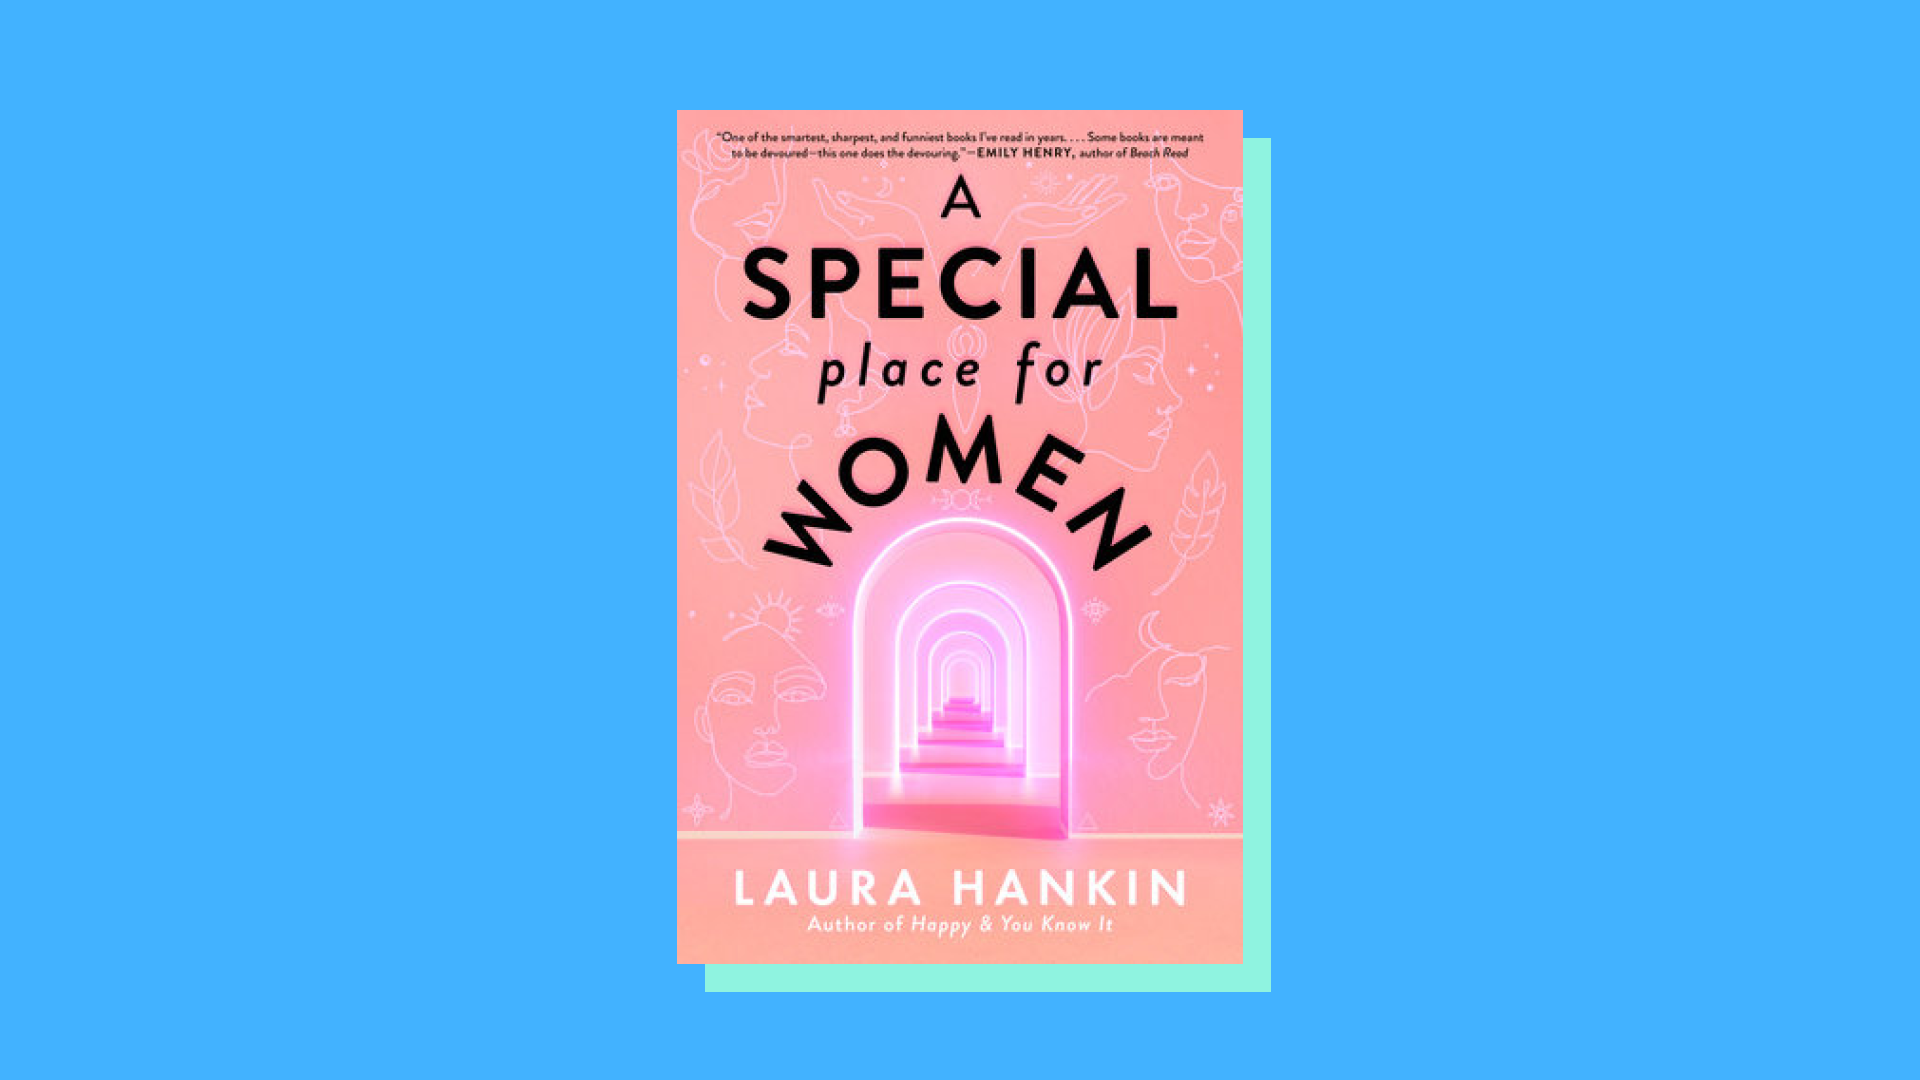 “A Special Place for Women” by Laura Hankin 